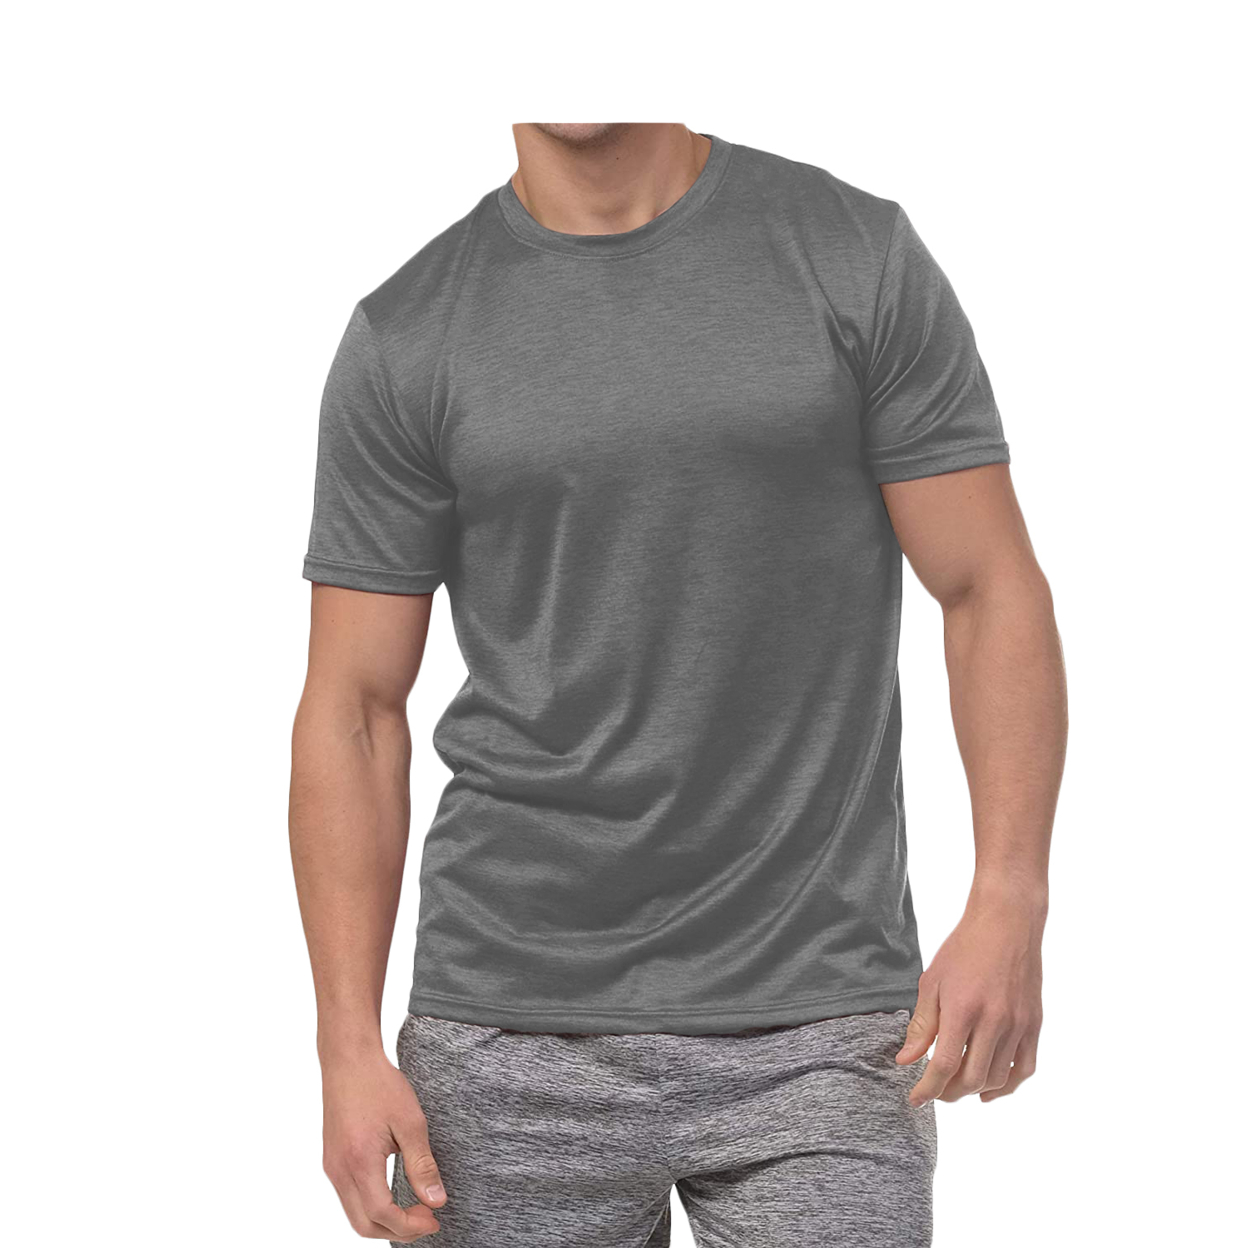 5-Pack: Men's Active Moisture Wicking Dry Fit Crew Neck Shirts - X-Large